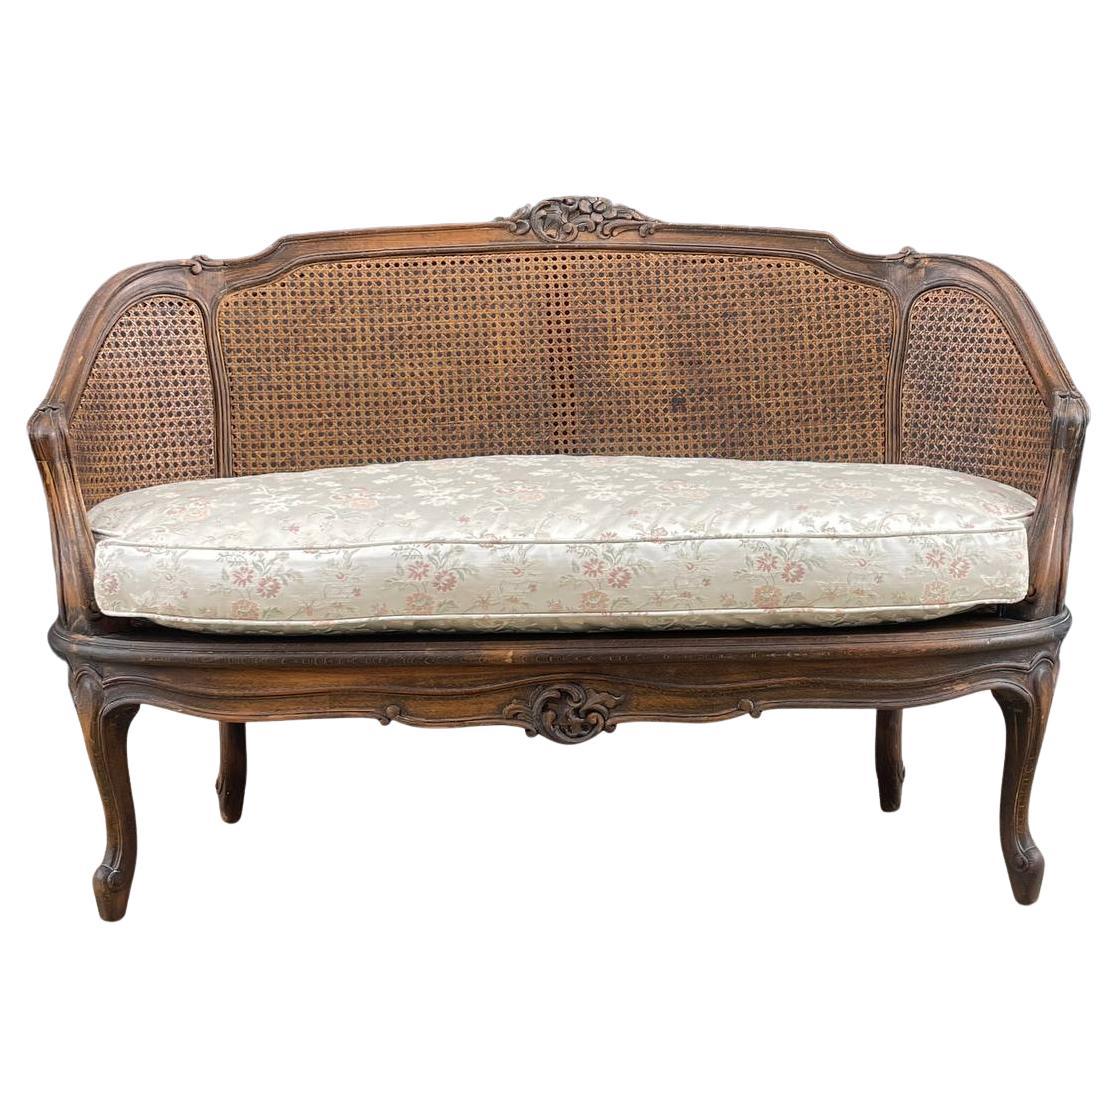 Antique French Louis XV Style Caned Settee Sofa For Sale